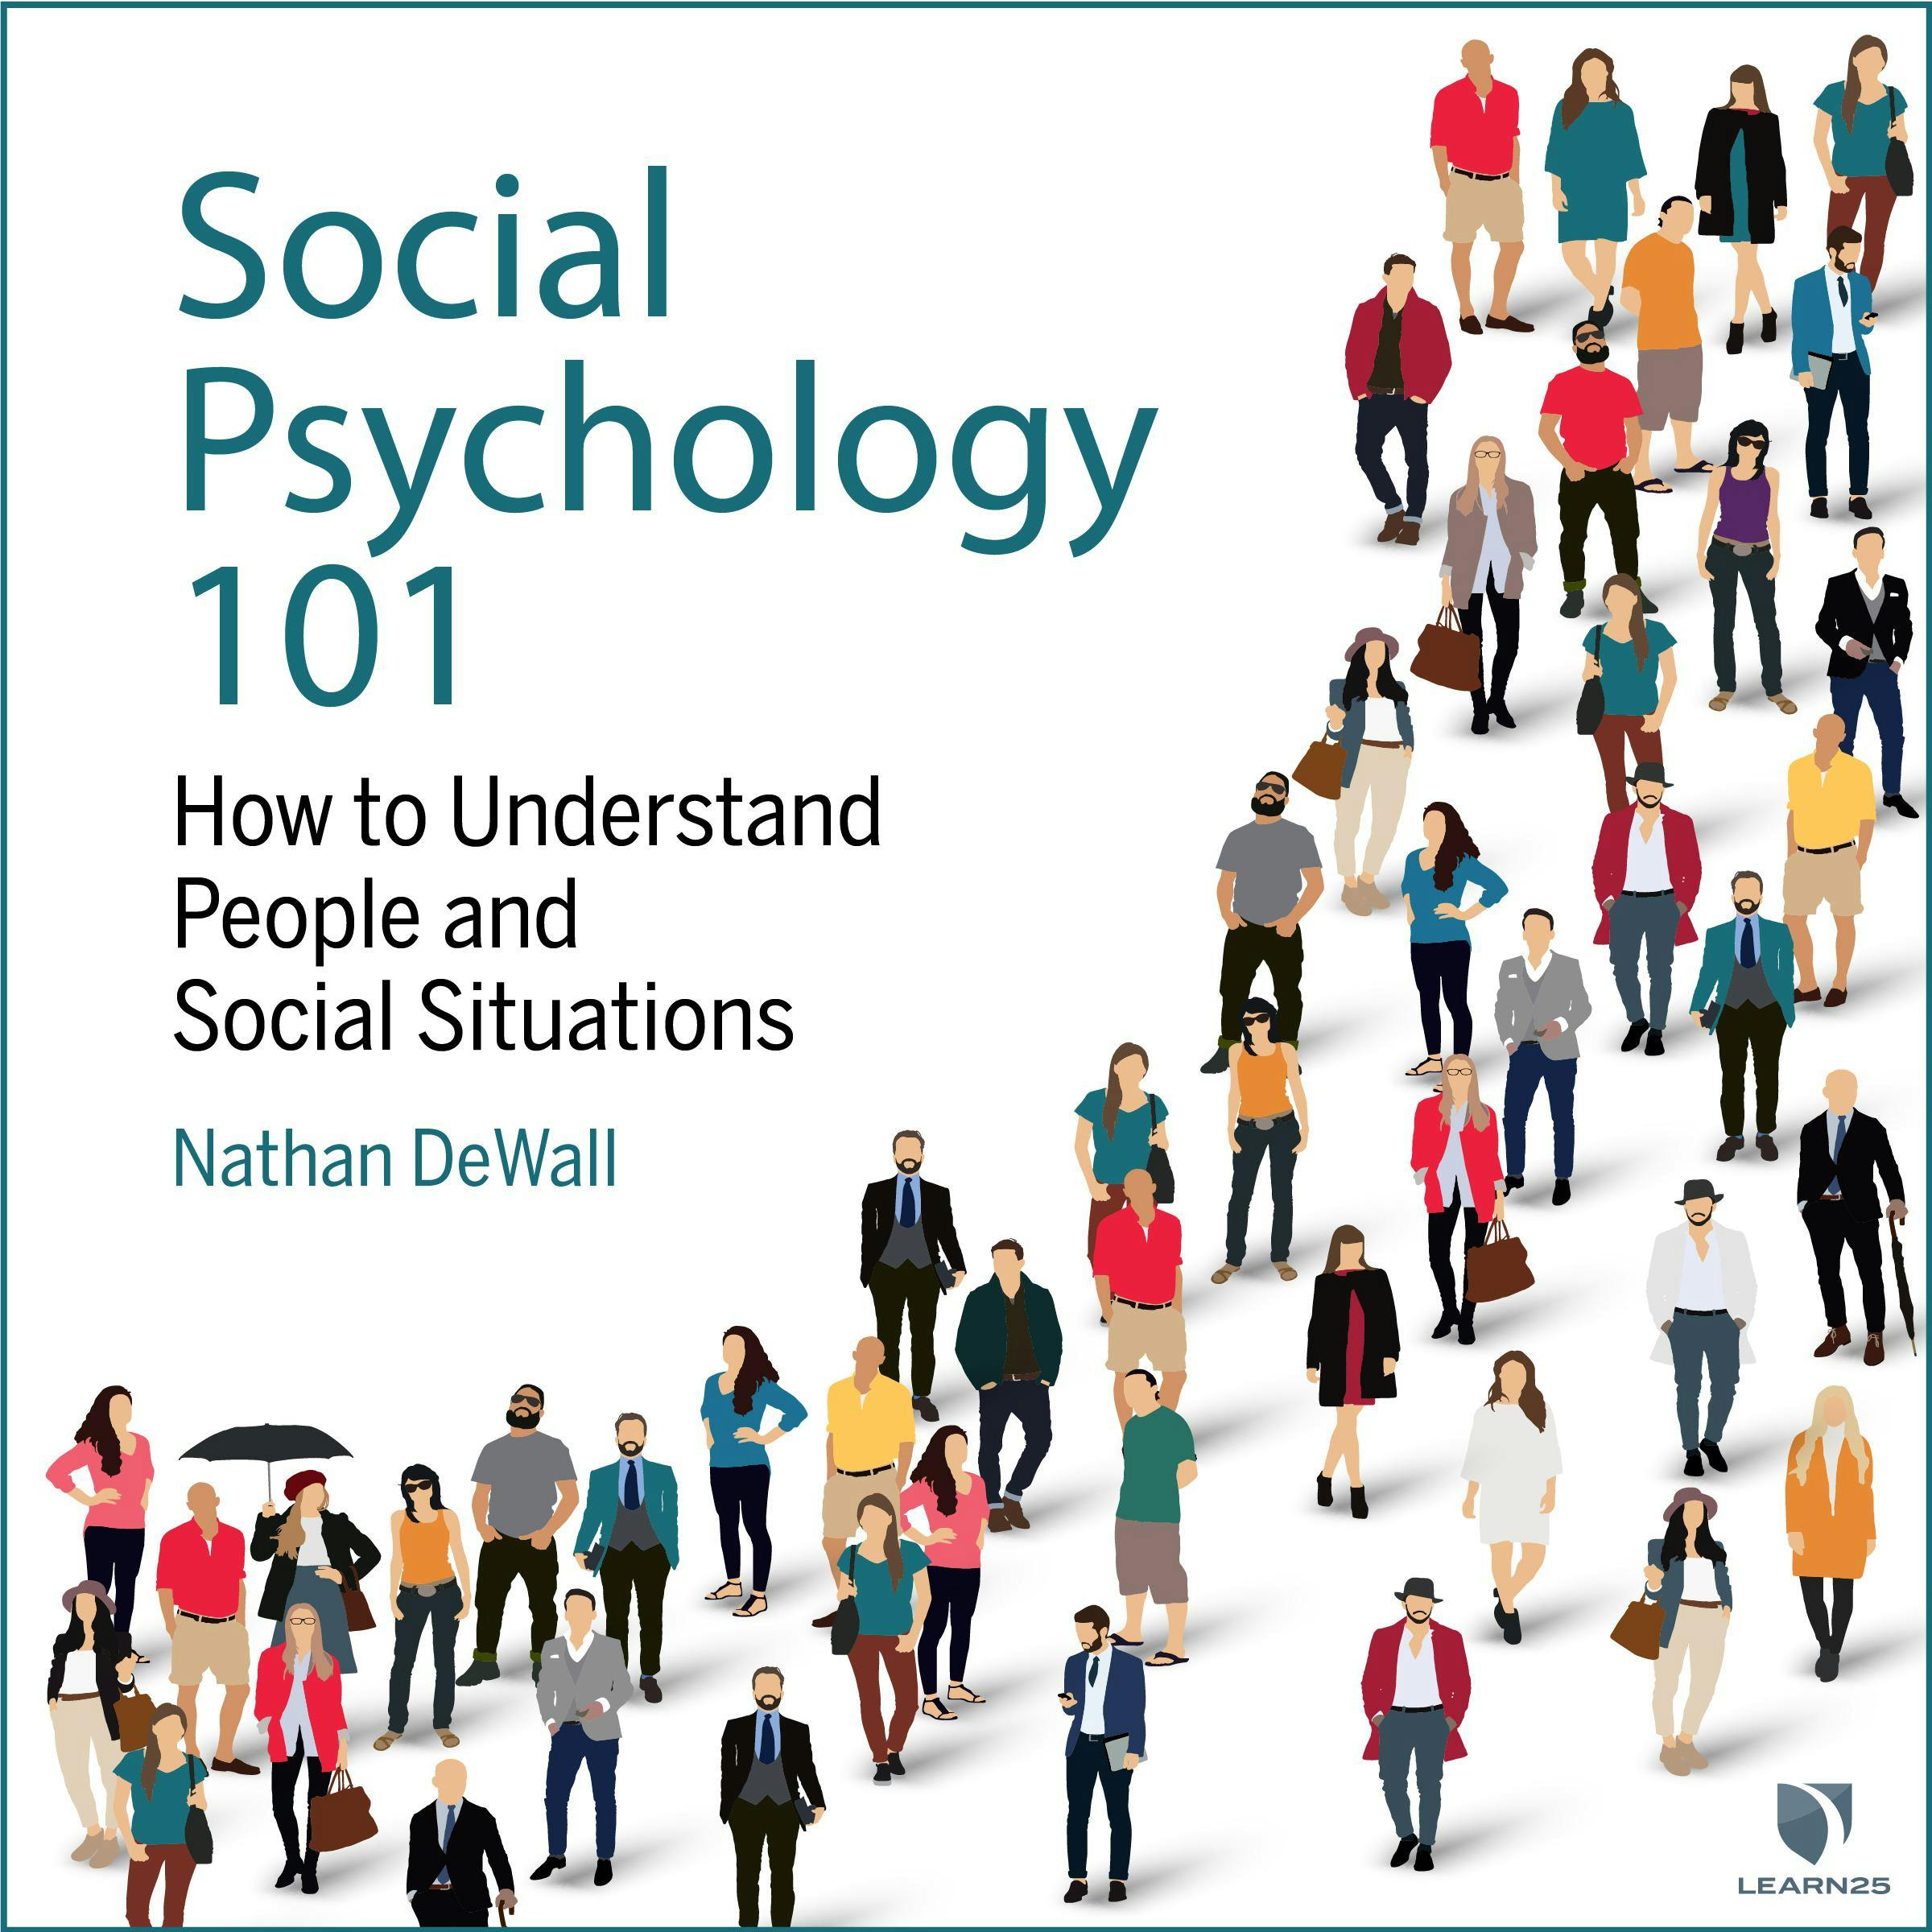 Social Psychology 101: How to Understand People and Social Situations - Nathan DeWall